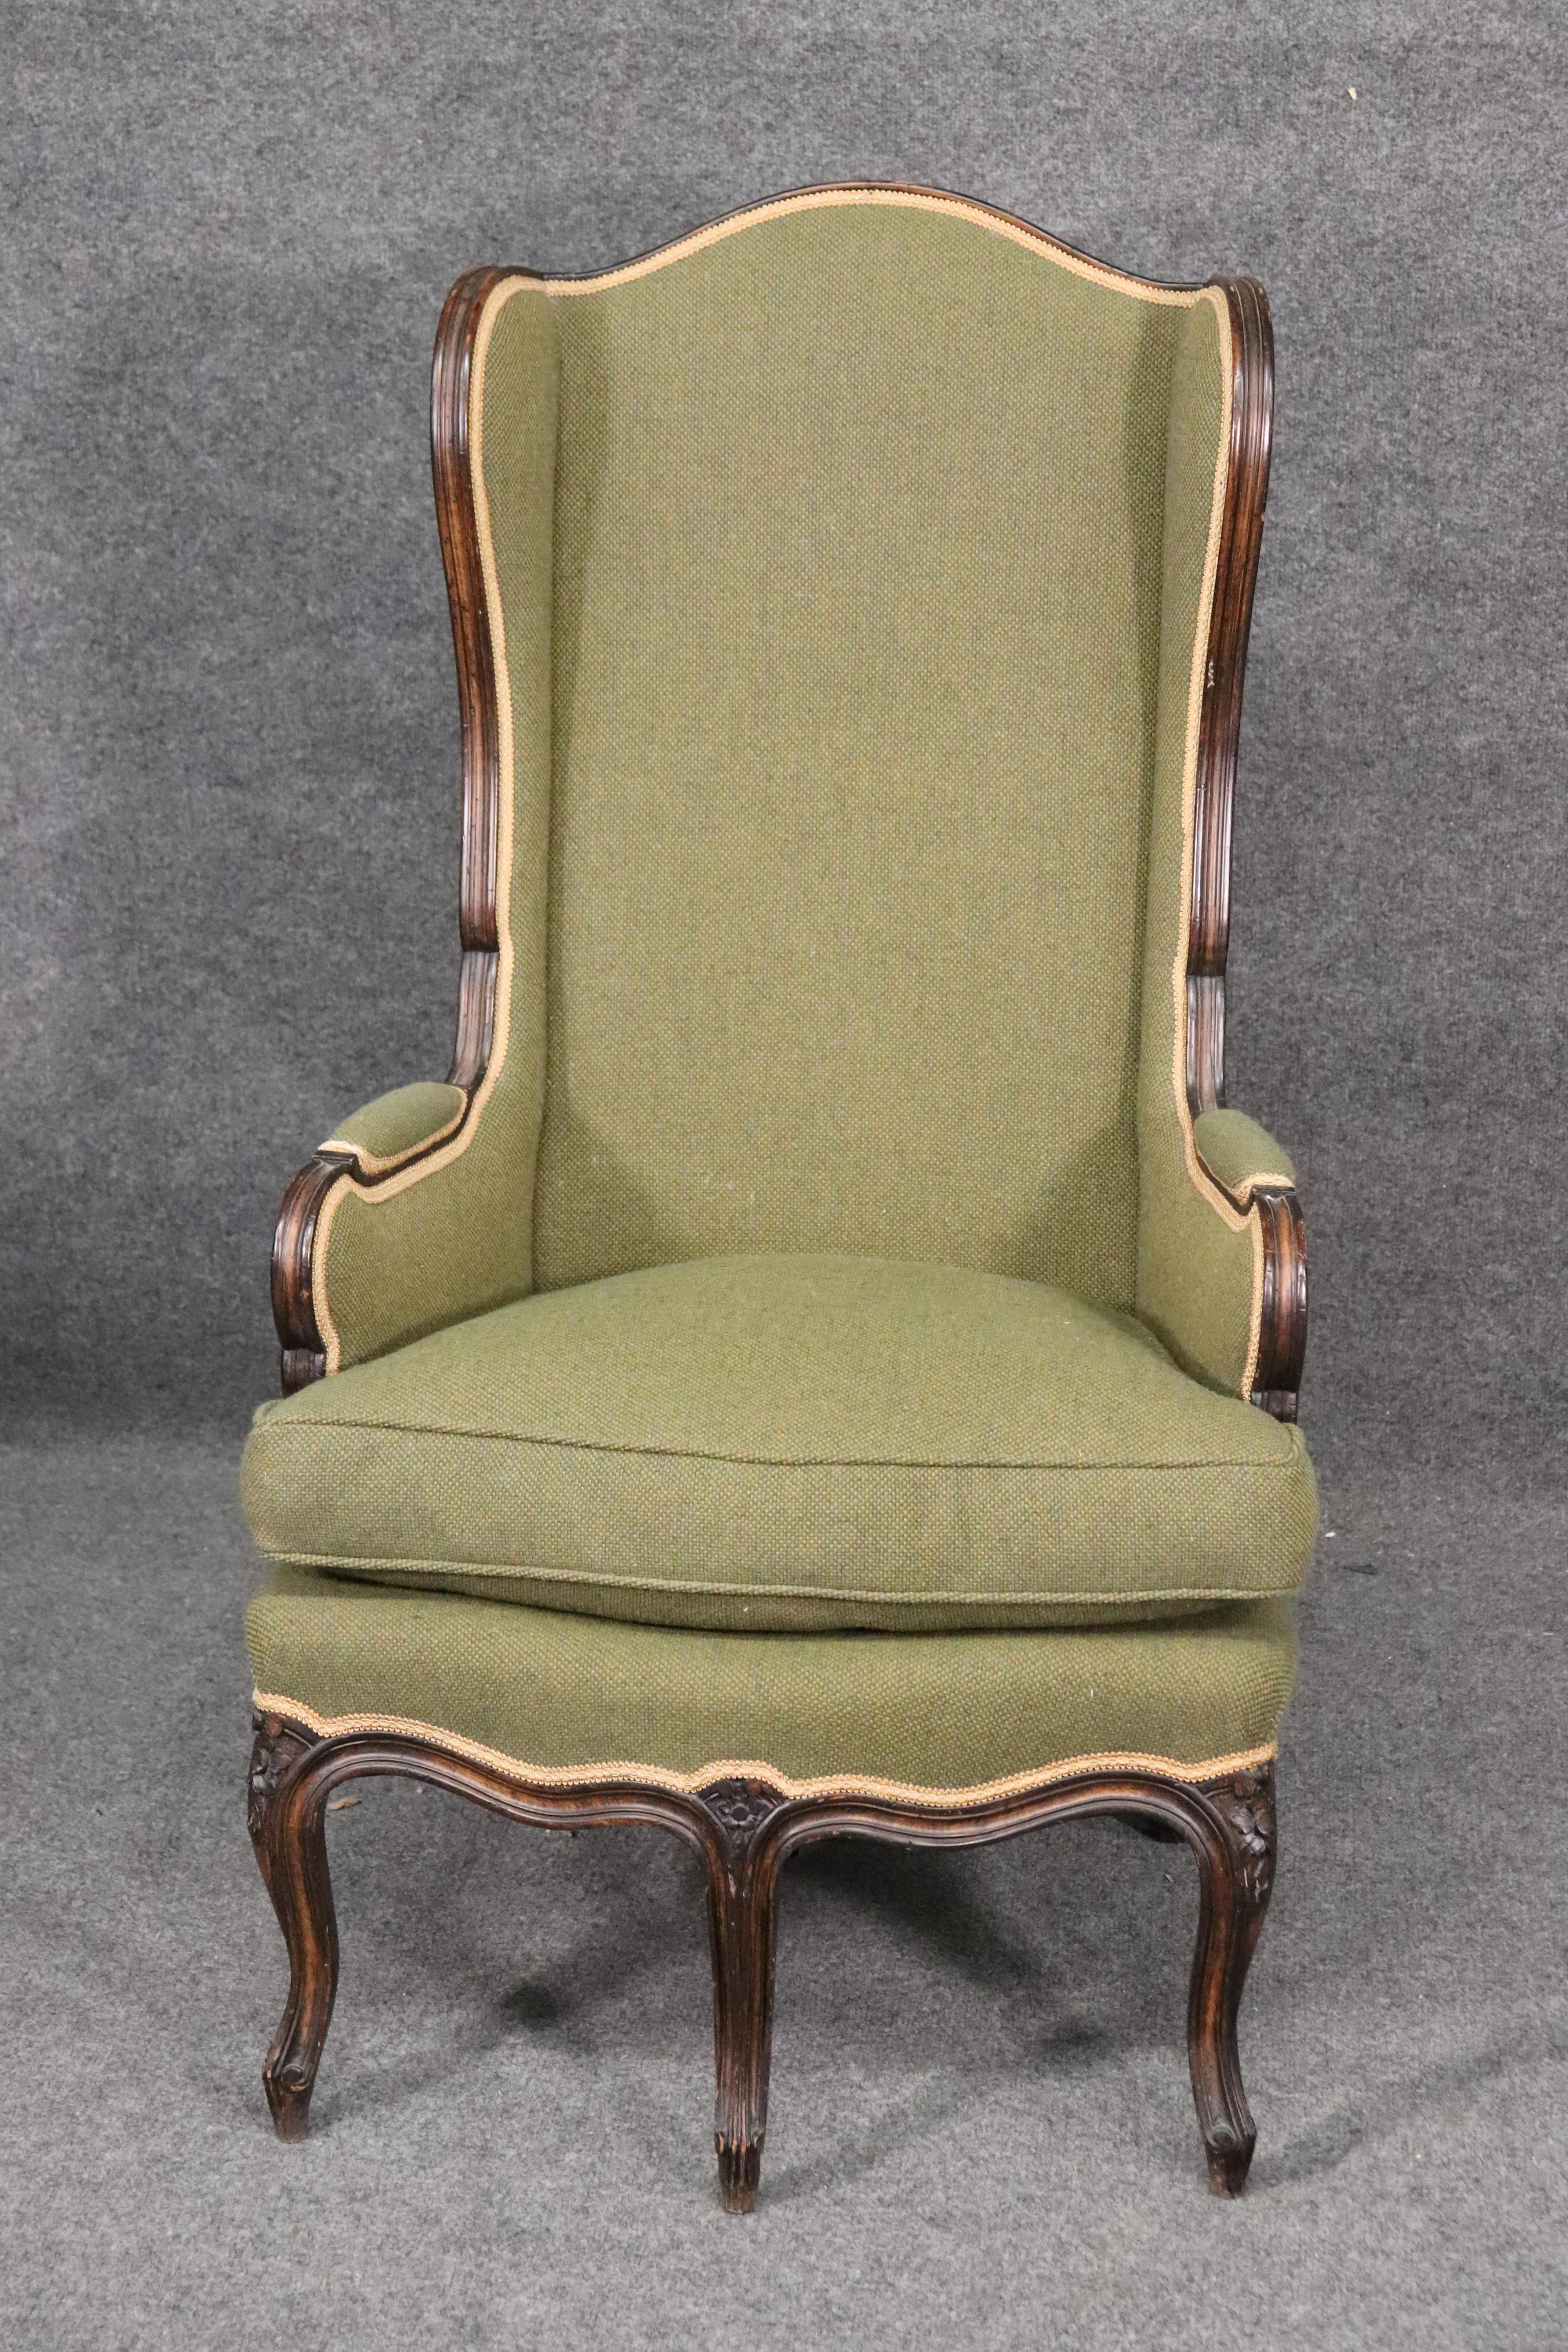 This is a very rare form of French chair. The chair has 5 legs with 3 in the front and this is an unusual thing to find. The chair is upholstered in what I believe is an Oliver green wool tweed upholstery and the frame is in good condition.